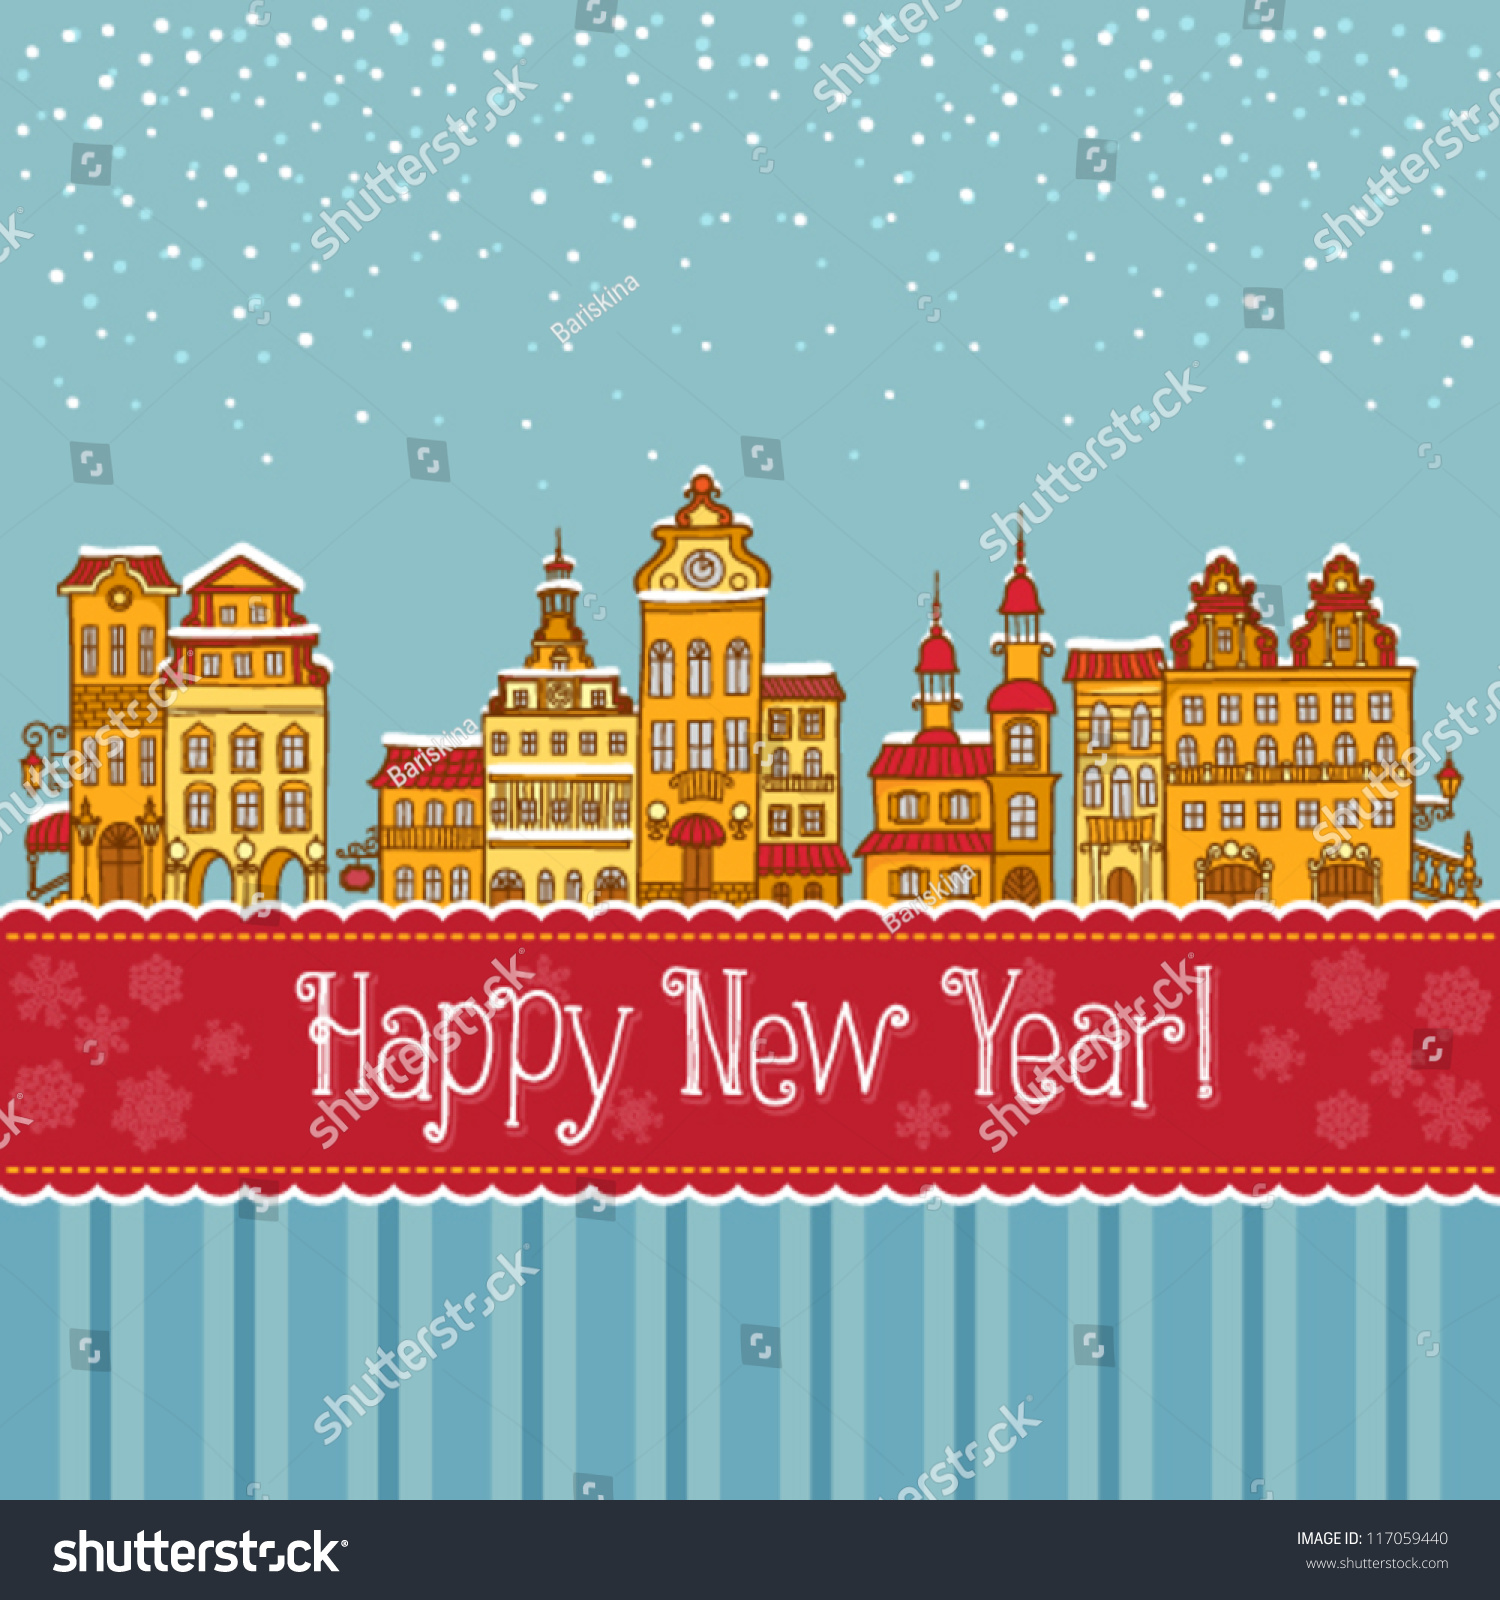 Christmas New Year illustration with day houses and festive ribbon Vector background for your